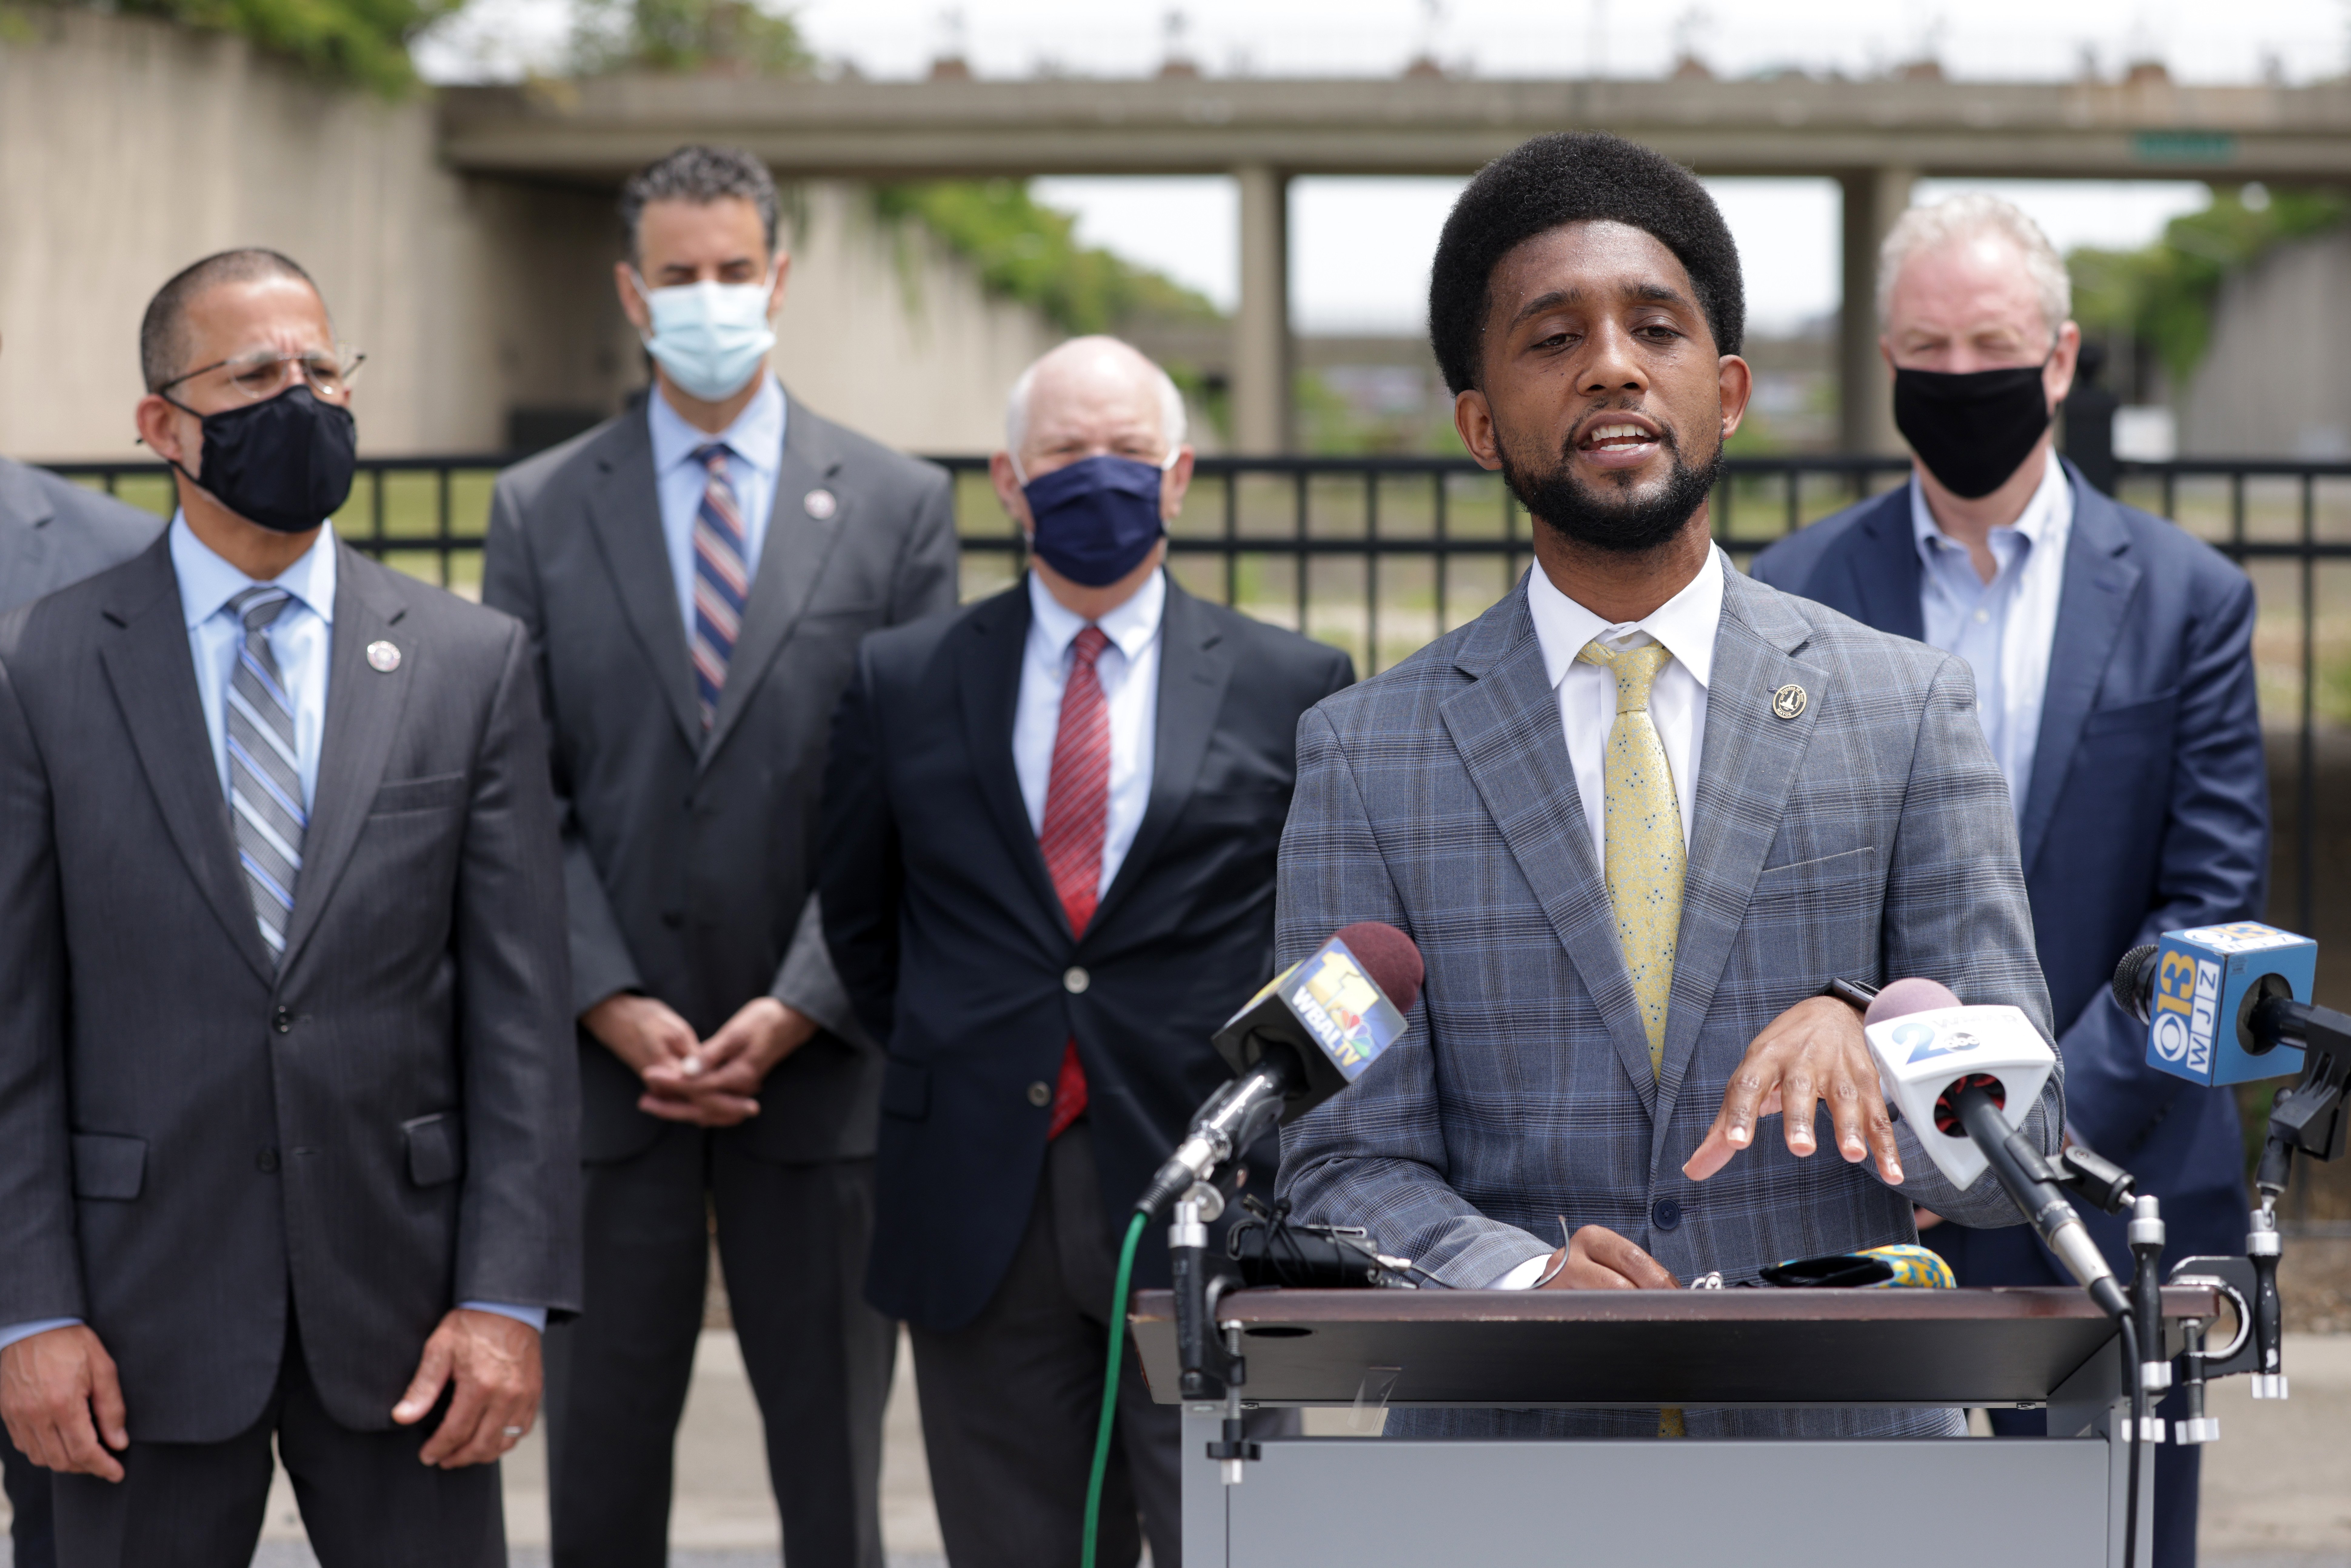 Baltimore Mayor Brandon Scott speaks on May 17, 2021 in Baltimore, Maryland. Scott is currently suing Big Oil firm BP for allegedly misleading the public about climate change. (Alex Wong/Getty Images)